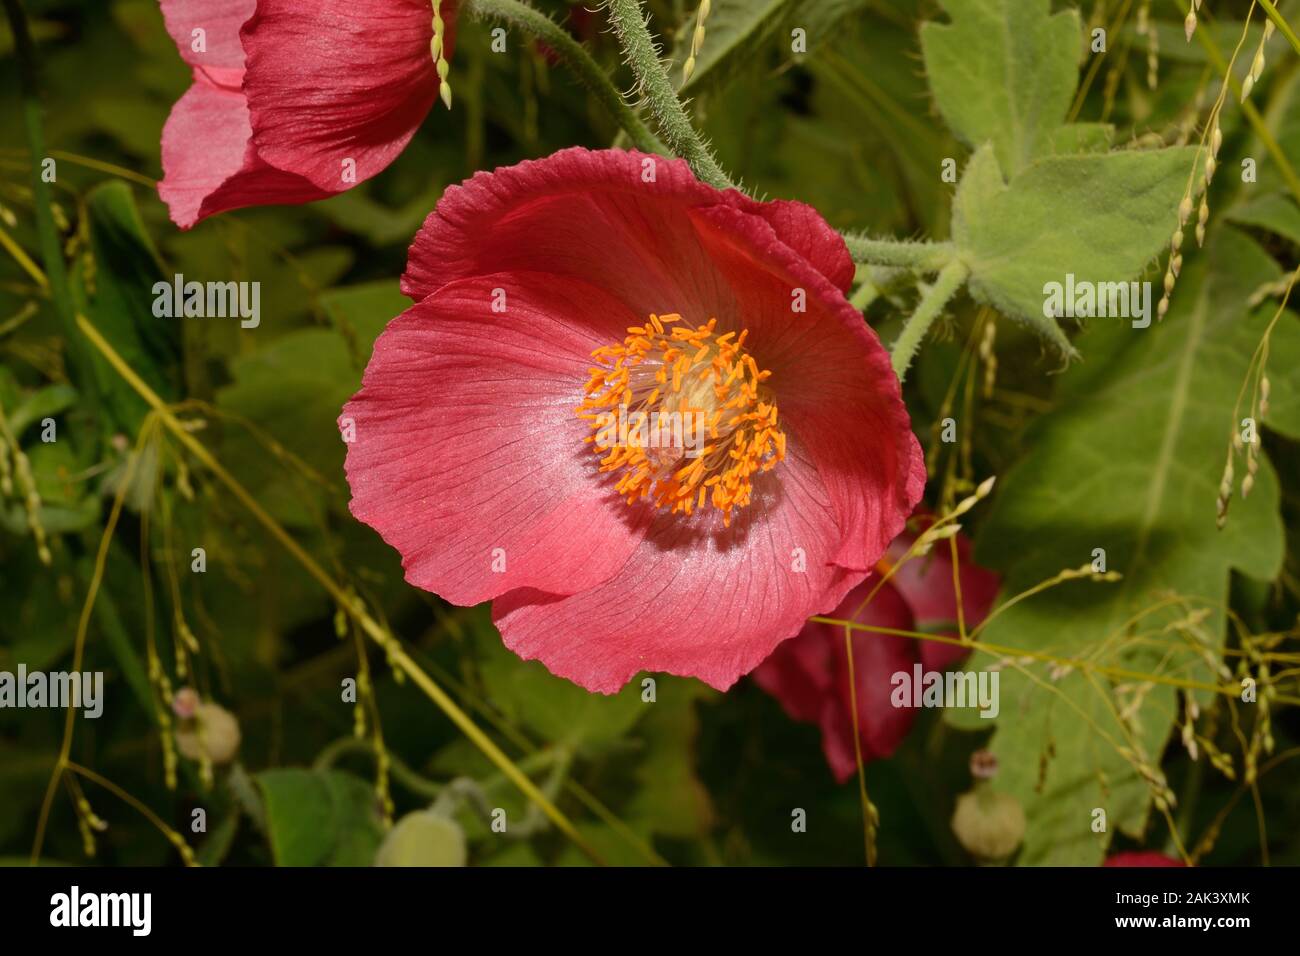 Meconopsis paniculata (golden Himalayan poppy) is a Himalayan plant found on grassy slopes and forest under-stories. Stock Photo